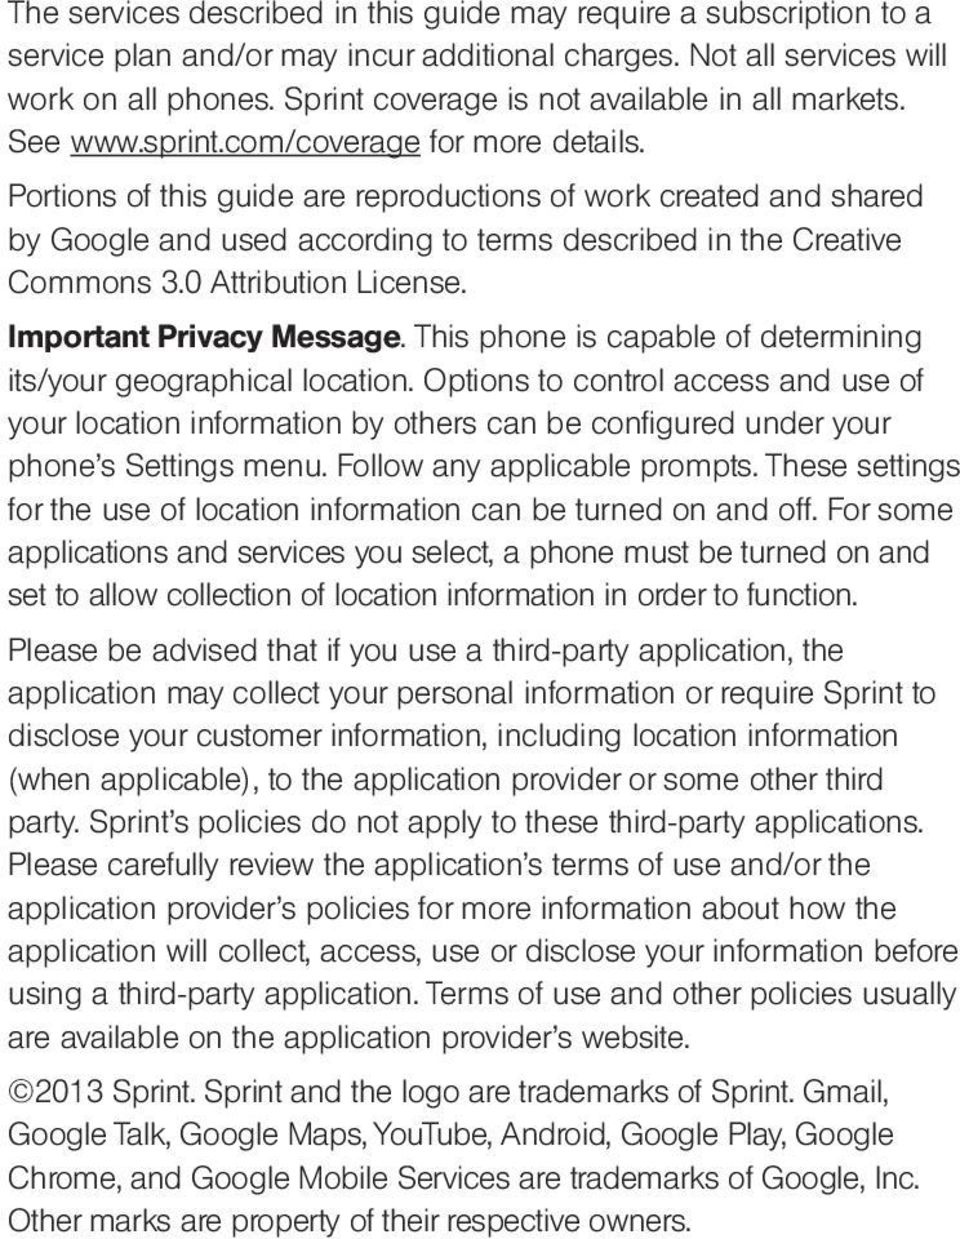 Portions of this guide are reproductions of work created and shared by Google and used according to terms described in the Creative Commons 3.0 Attribution License. Important Privacy Message.